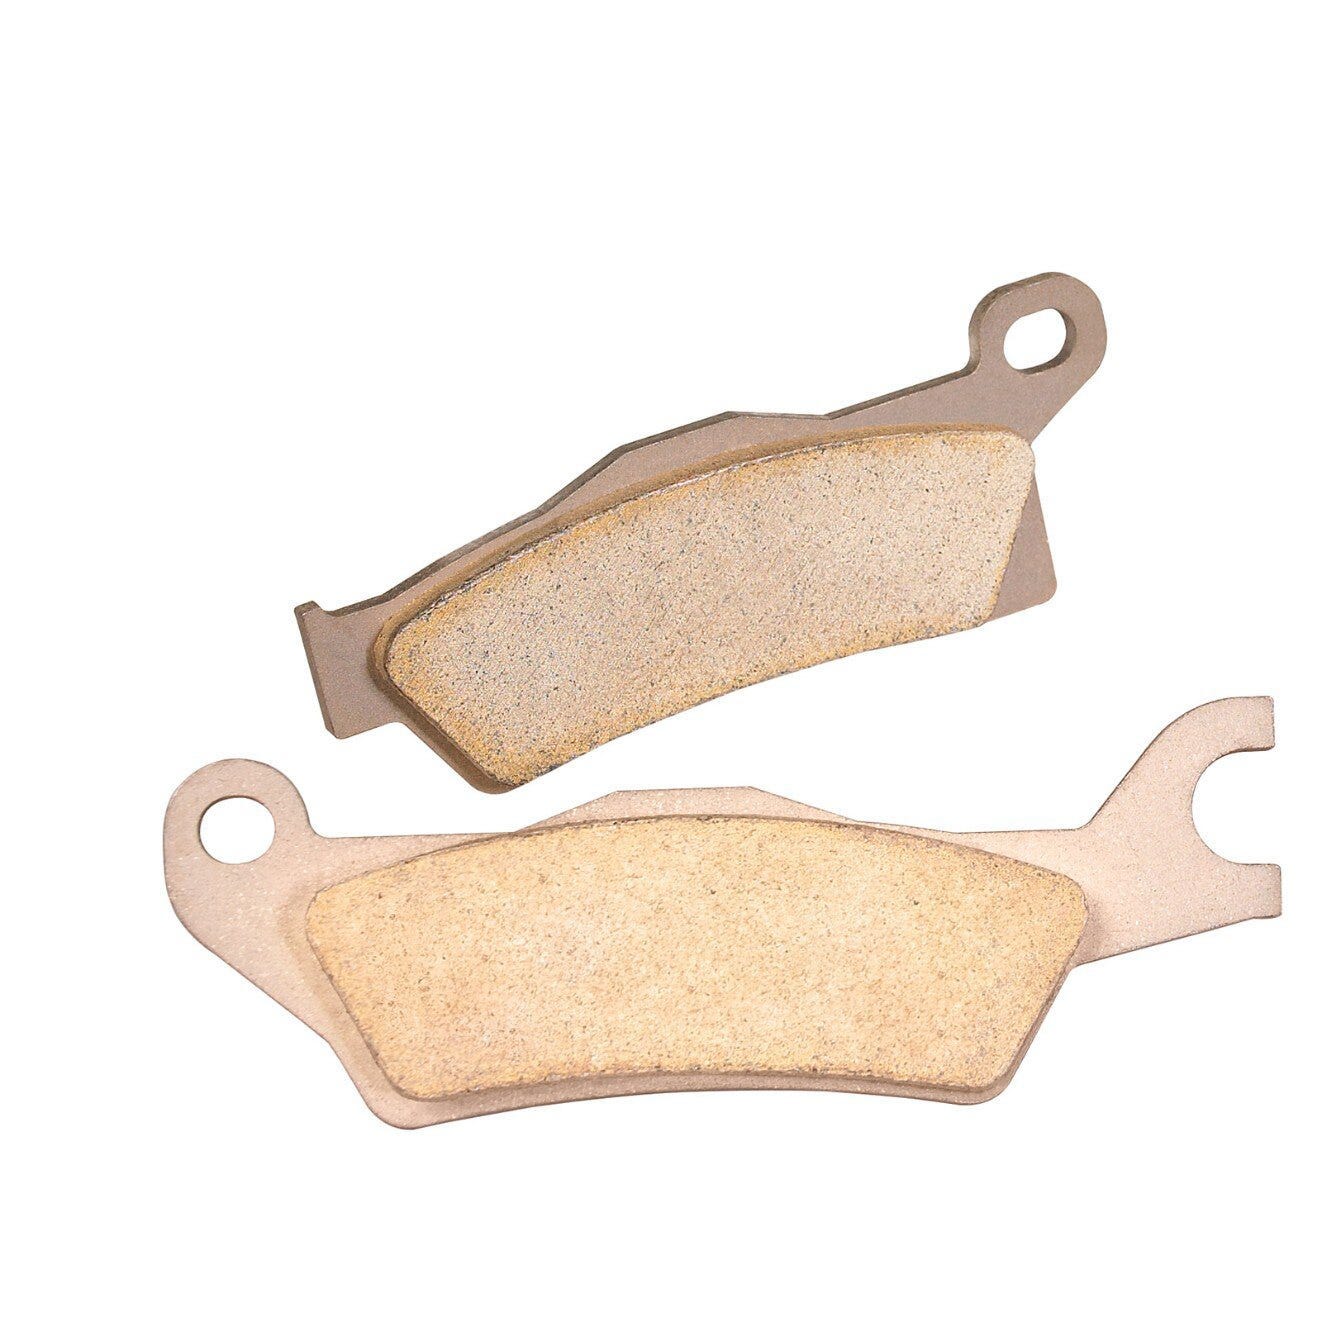 Can-am Metallic Brake Pad Kit - Front Left 715900379 - The Parts Lodge